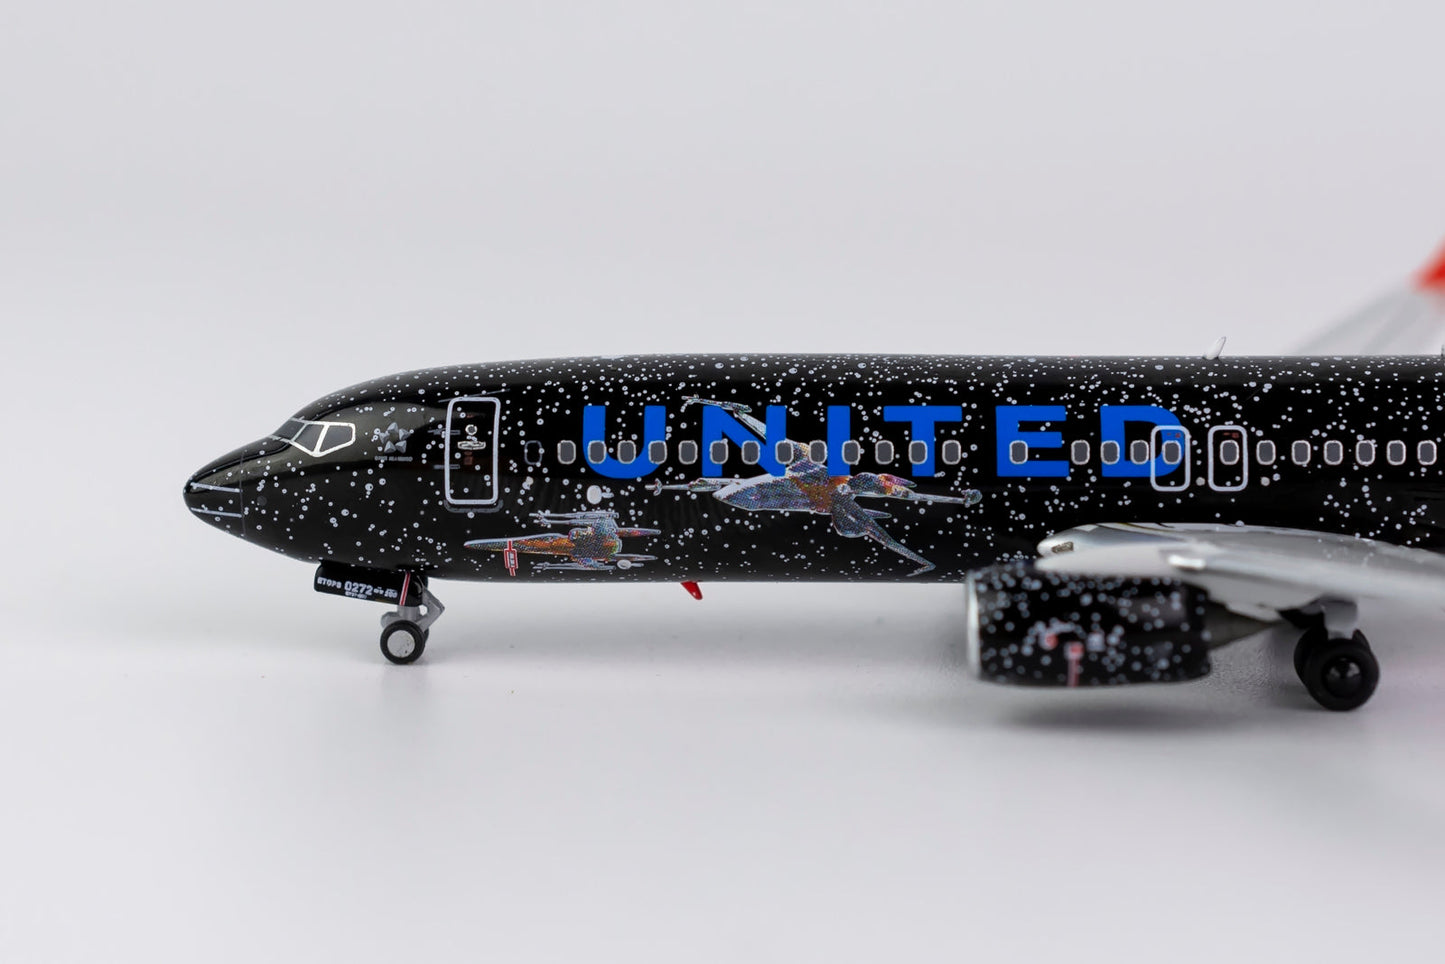 *1/400 United Airlines B 737-800/w "Star Wars Livery" NG Models 58133